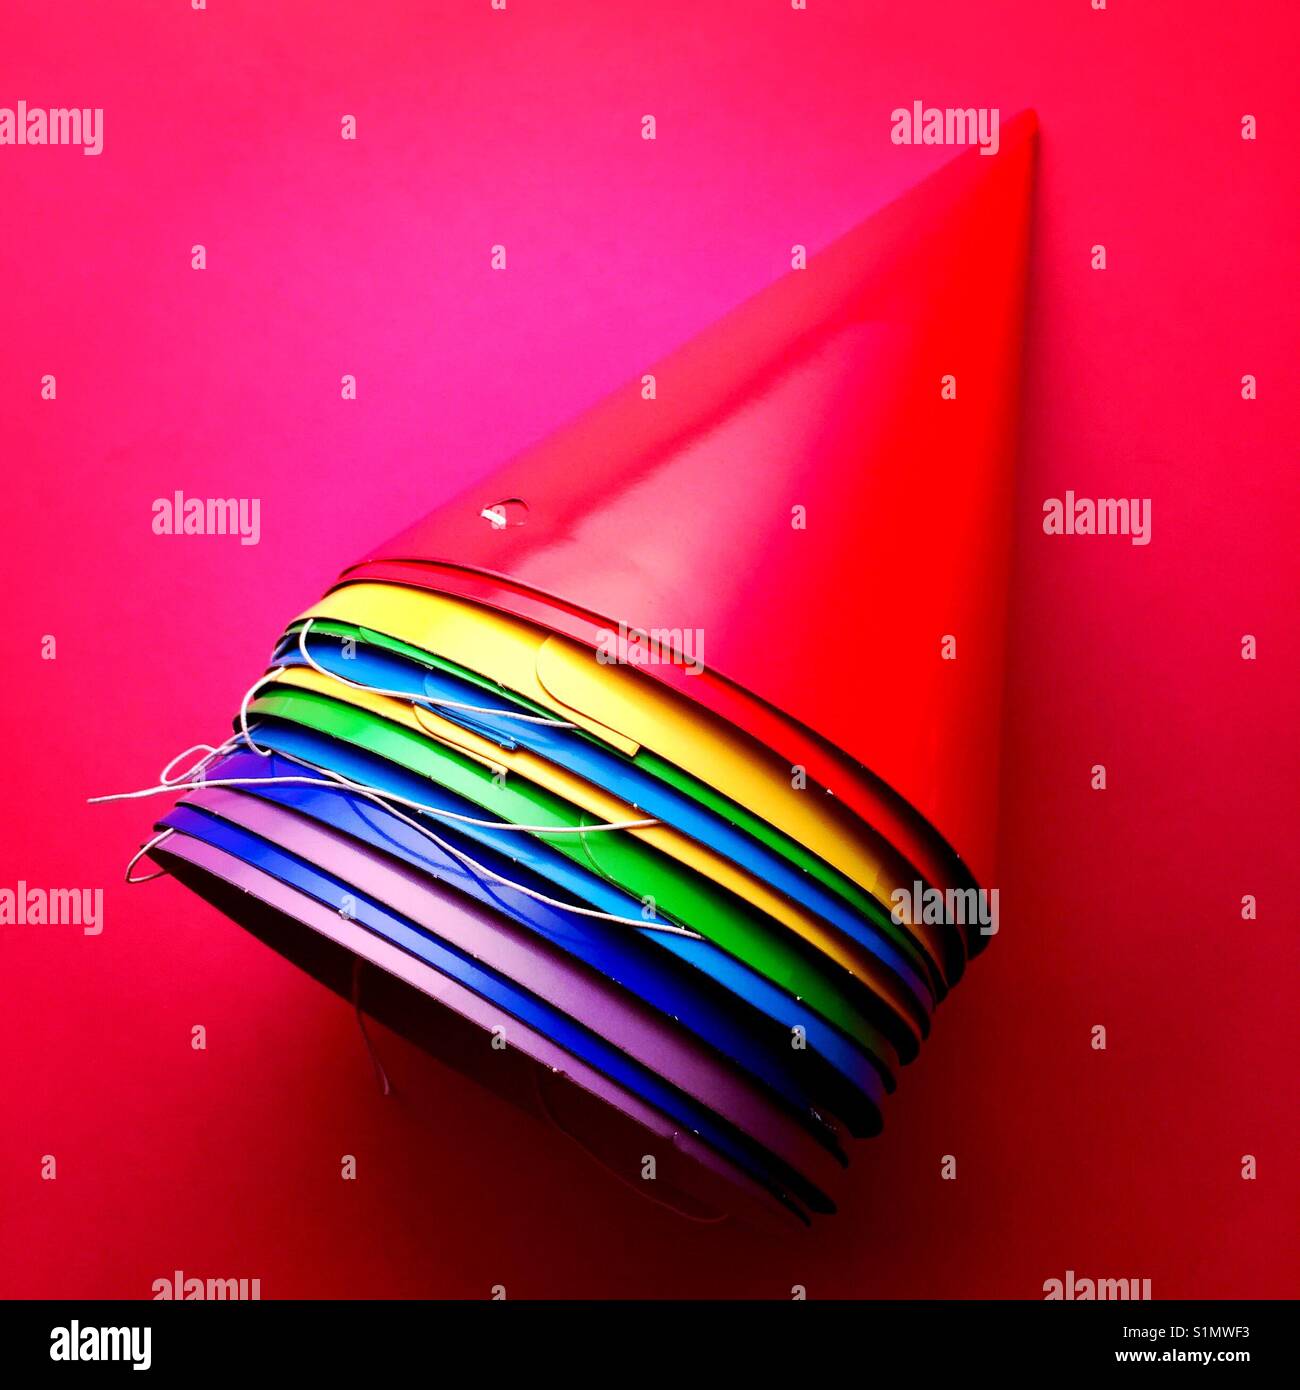 A bright colourful detail shot of a stack of party hats Stock Photo